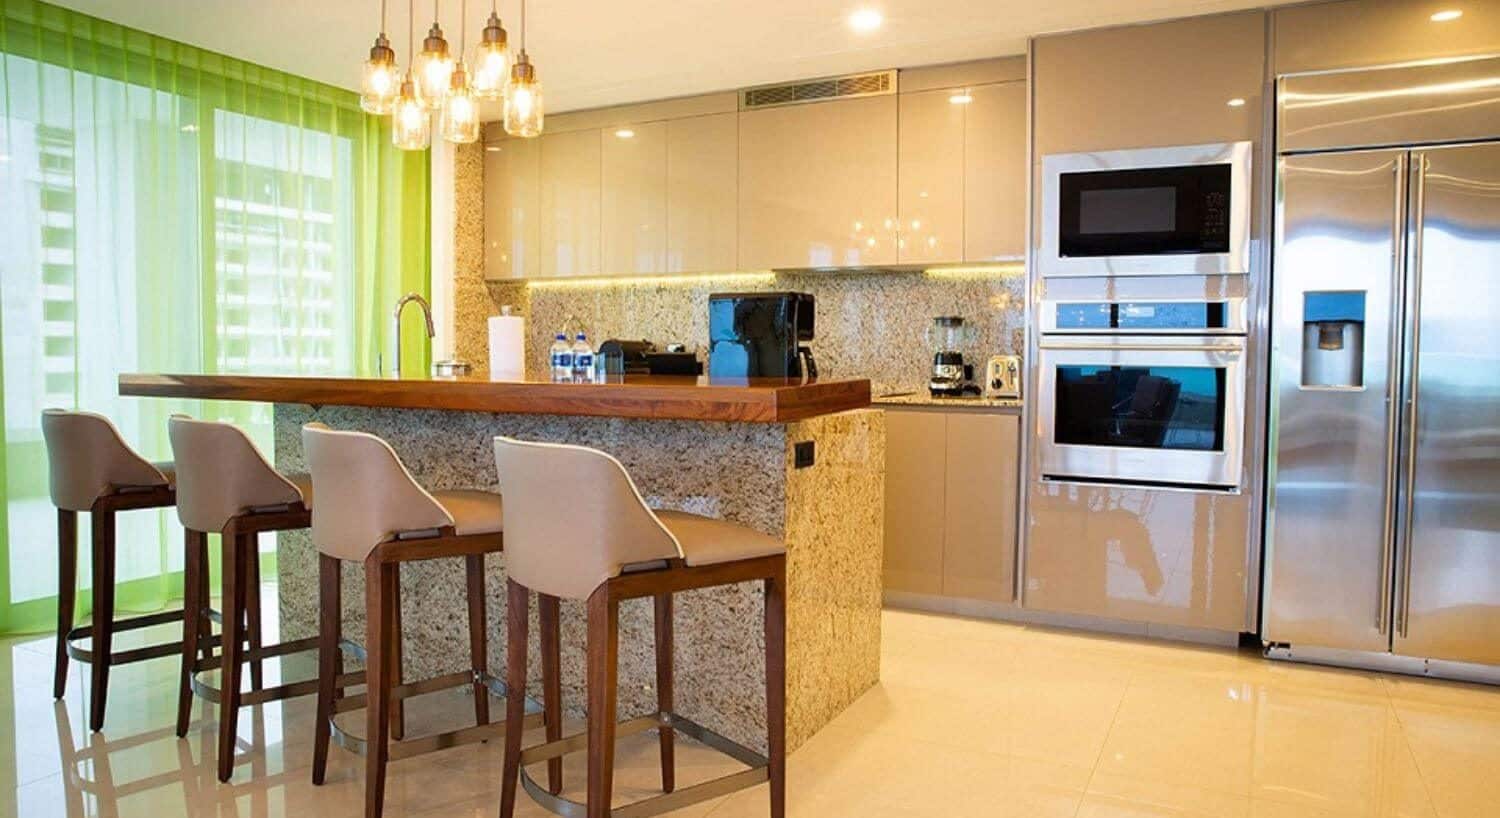 A gourmet kitchen with stainless steel appliances, a breakfast bar with 4 bar stools, and floor to ceiling windows with sheer green curtains that open out to a private balcony.